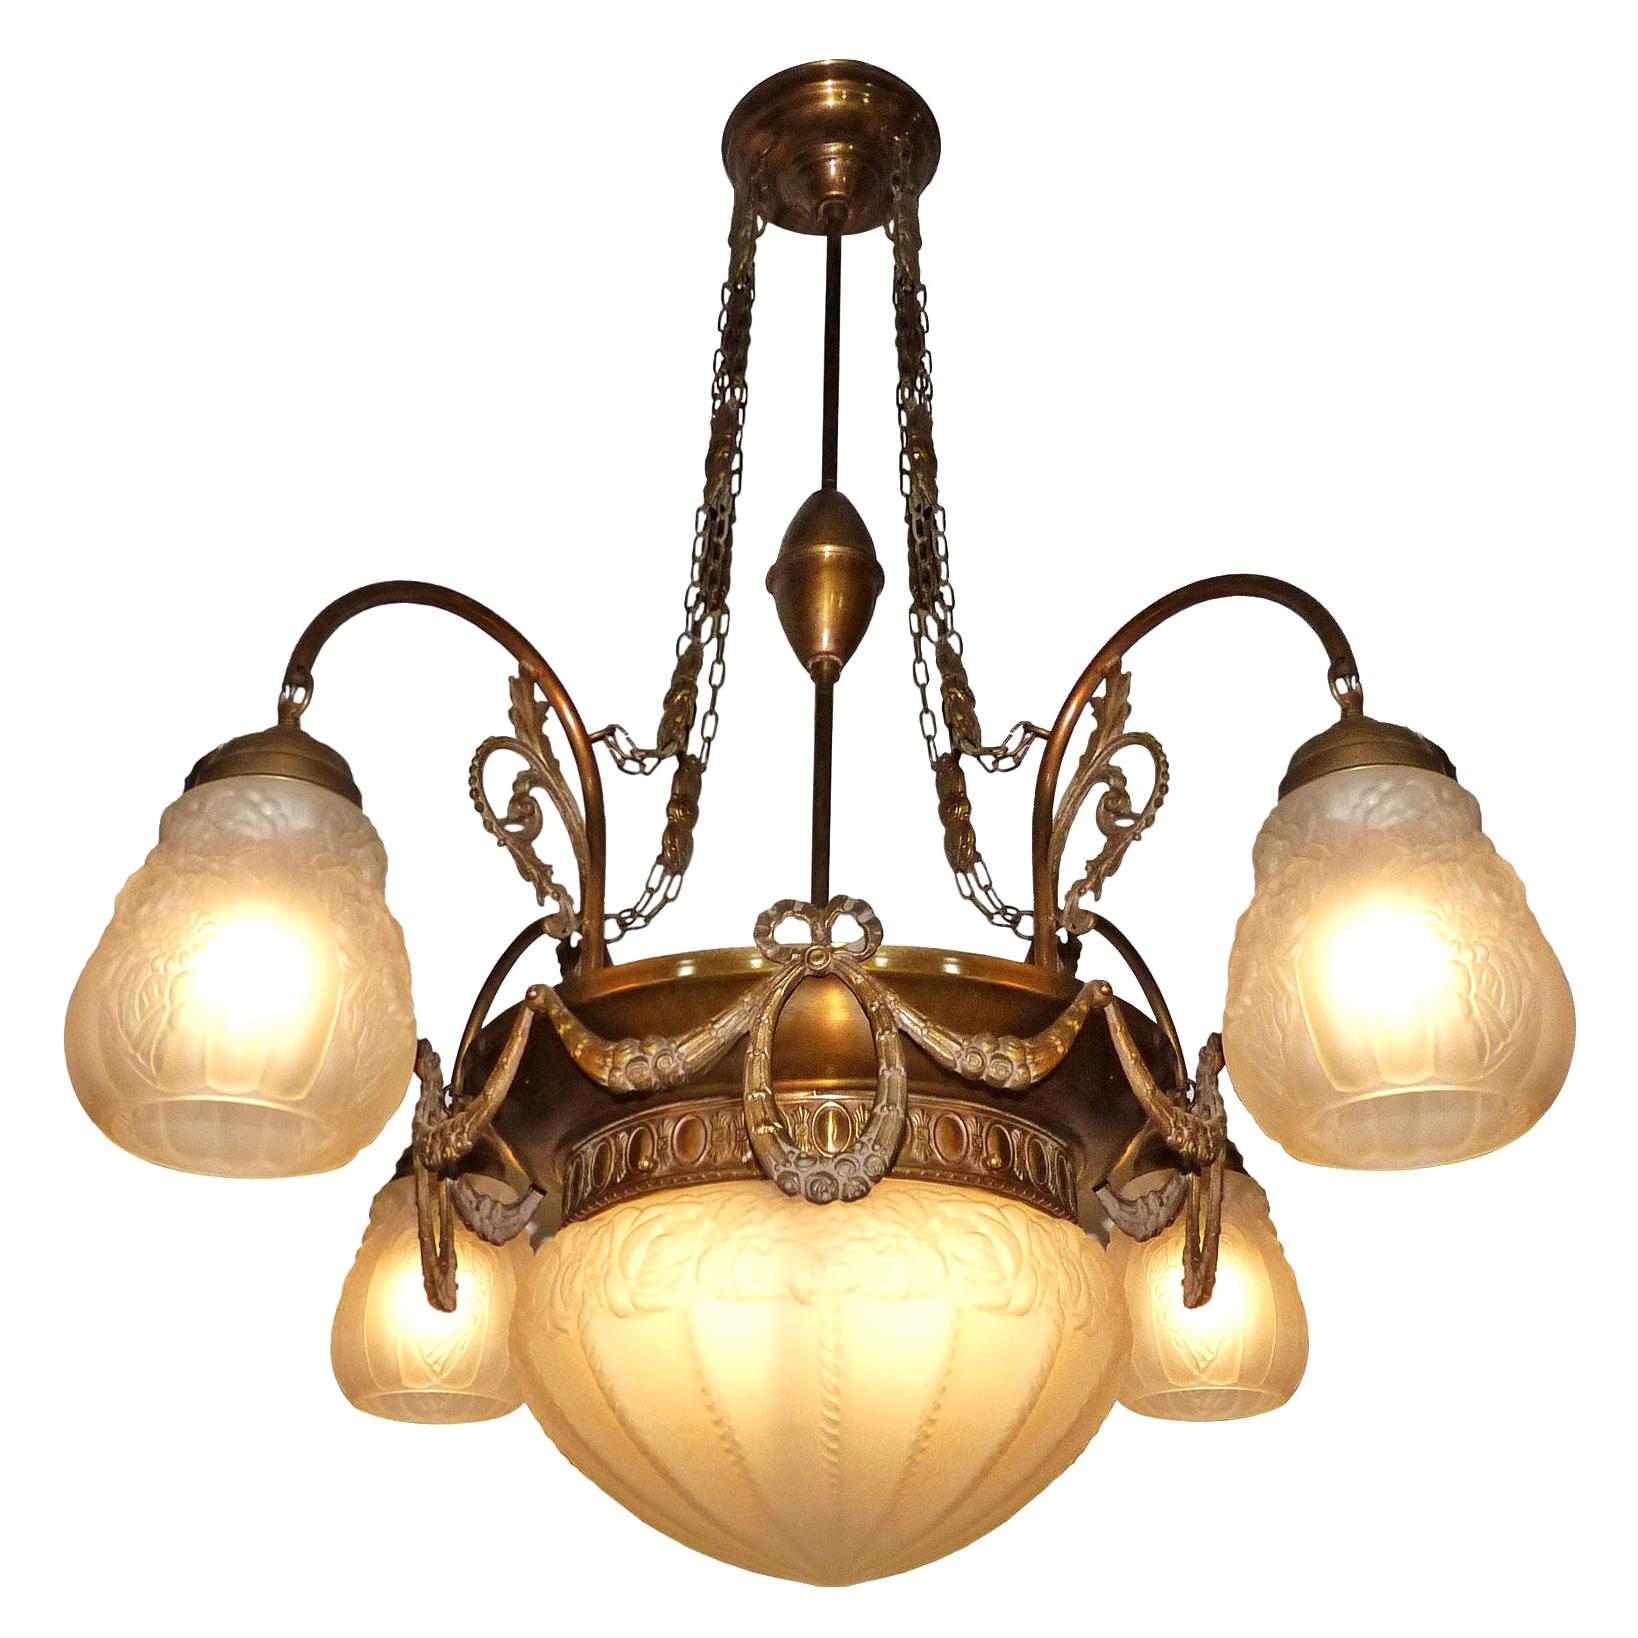 French Art Deco and Art Nouveau in frosted glass, 5-light chandelier/ brass with garlands. 
Age patina
Five light bulbs (four bulbs E14 40W and one bulb E27 60W)
Good working condition
Measures: Diameter 30 in / 75 cm
Height 34 in / 85 cm